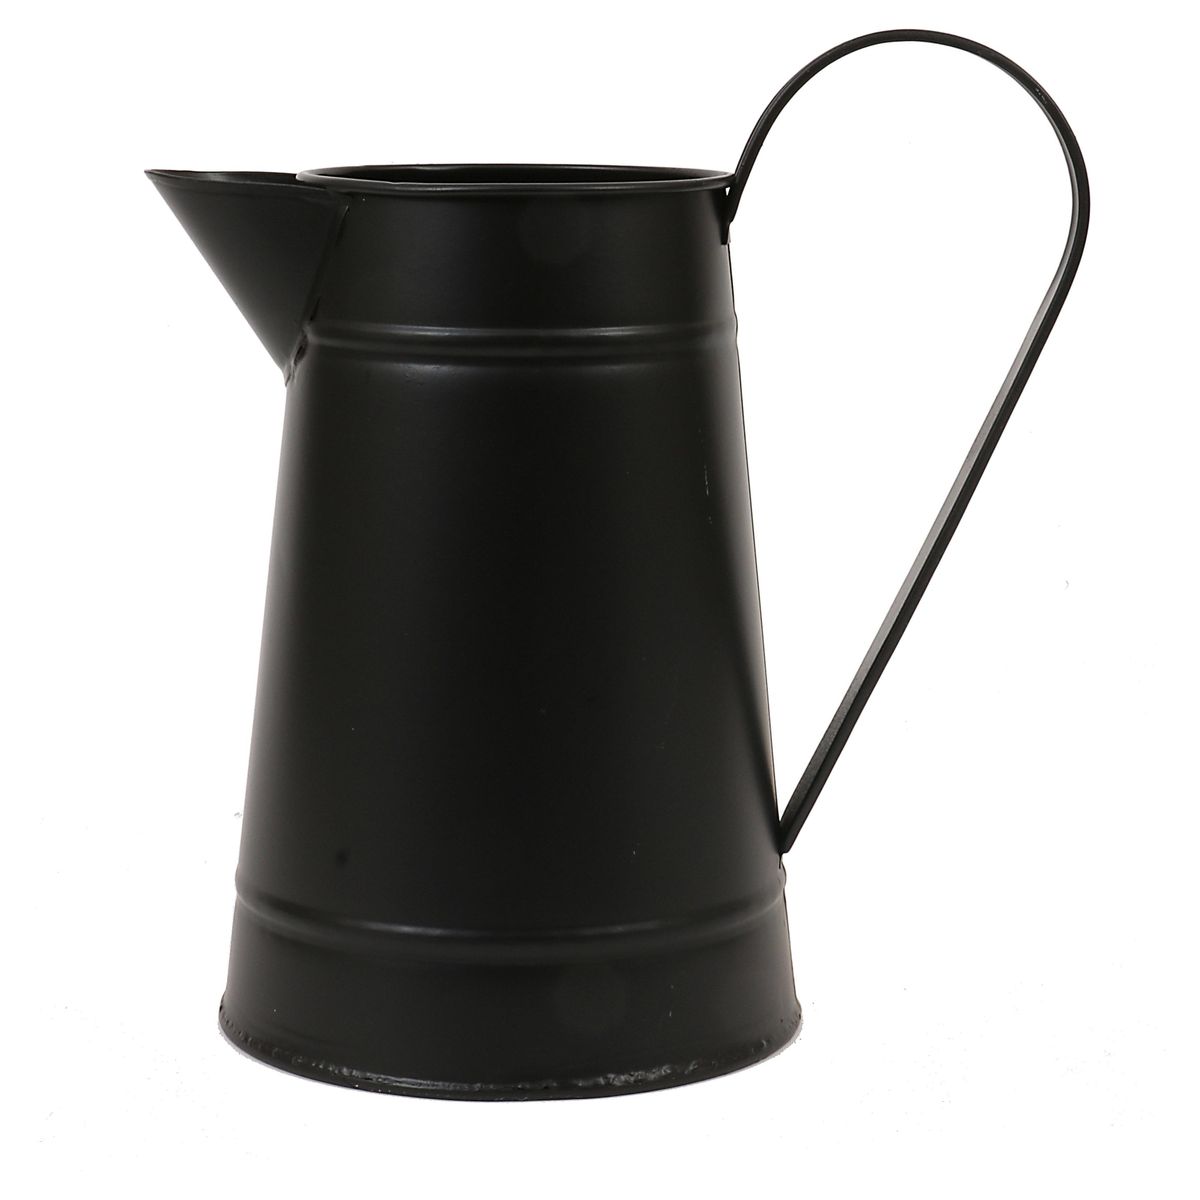 A drink pitcher that doubles as a watering can and triples as a vase is a sweet gift for the lay horticulturist in your life; the tin Darby Way Watering Pitcher Black ($13, target.com) is fashioned in the trending farmhouse style but is classic enough to withstand fleeting fads. (Target / Target)